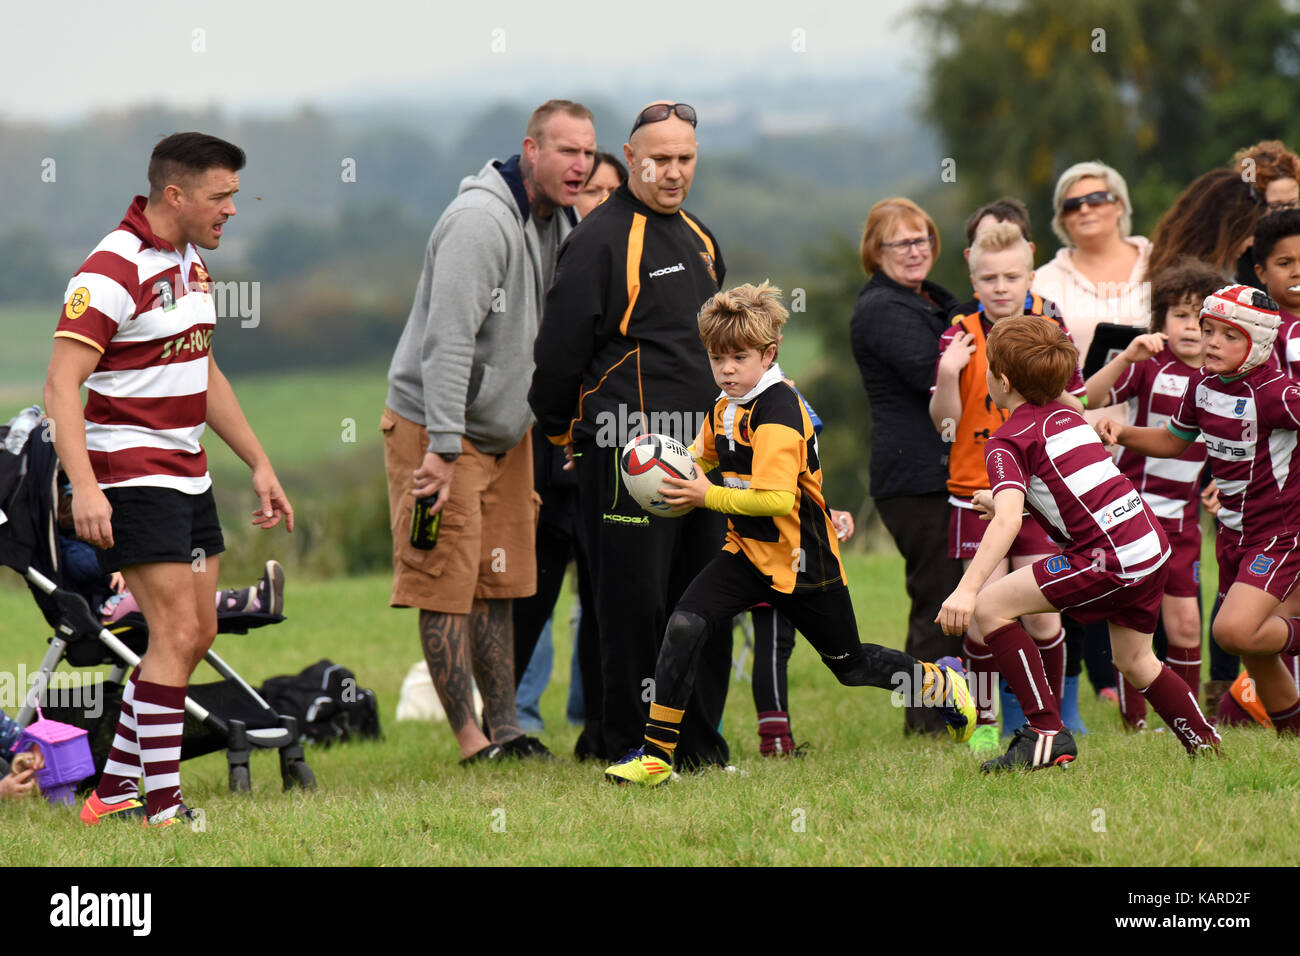 Boys playing junior rugby Britain Uk Stock Photo